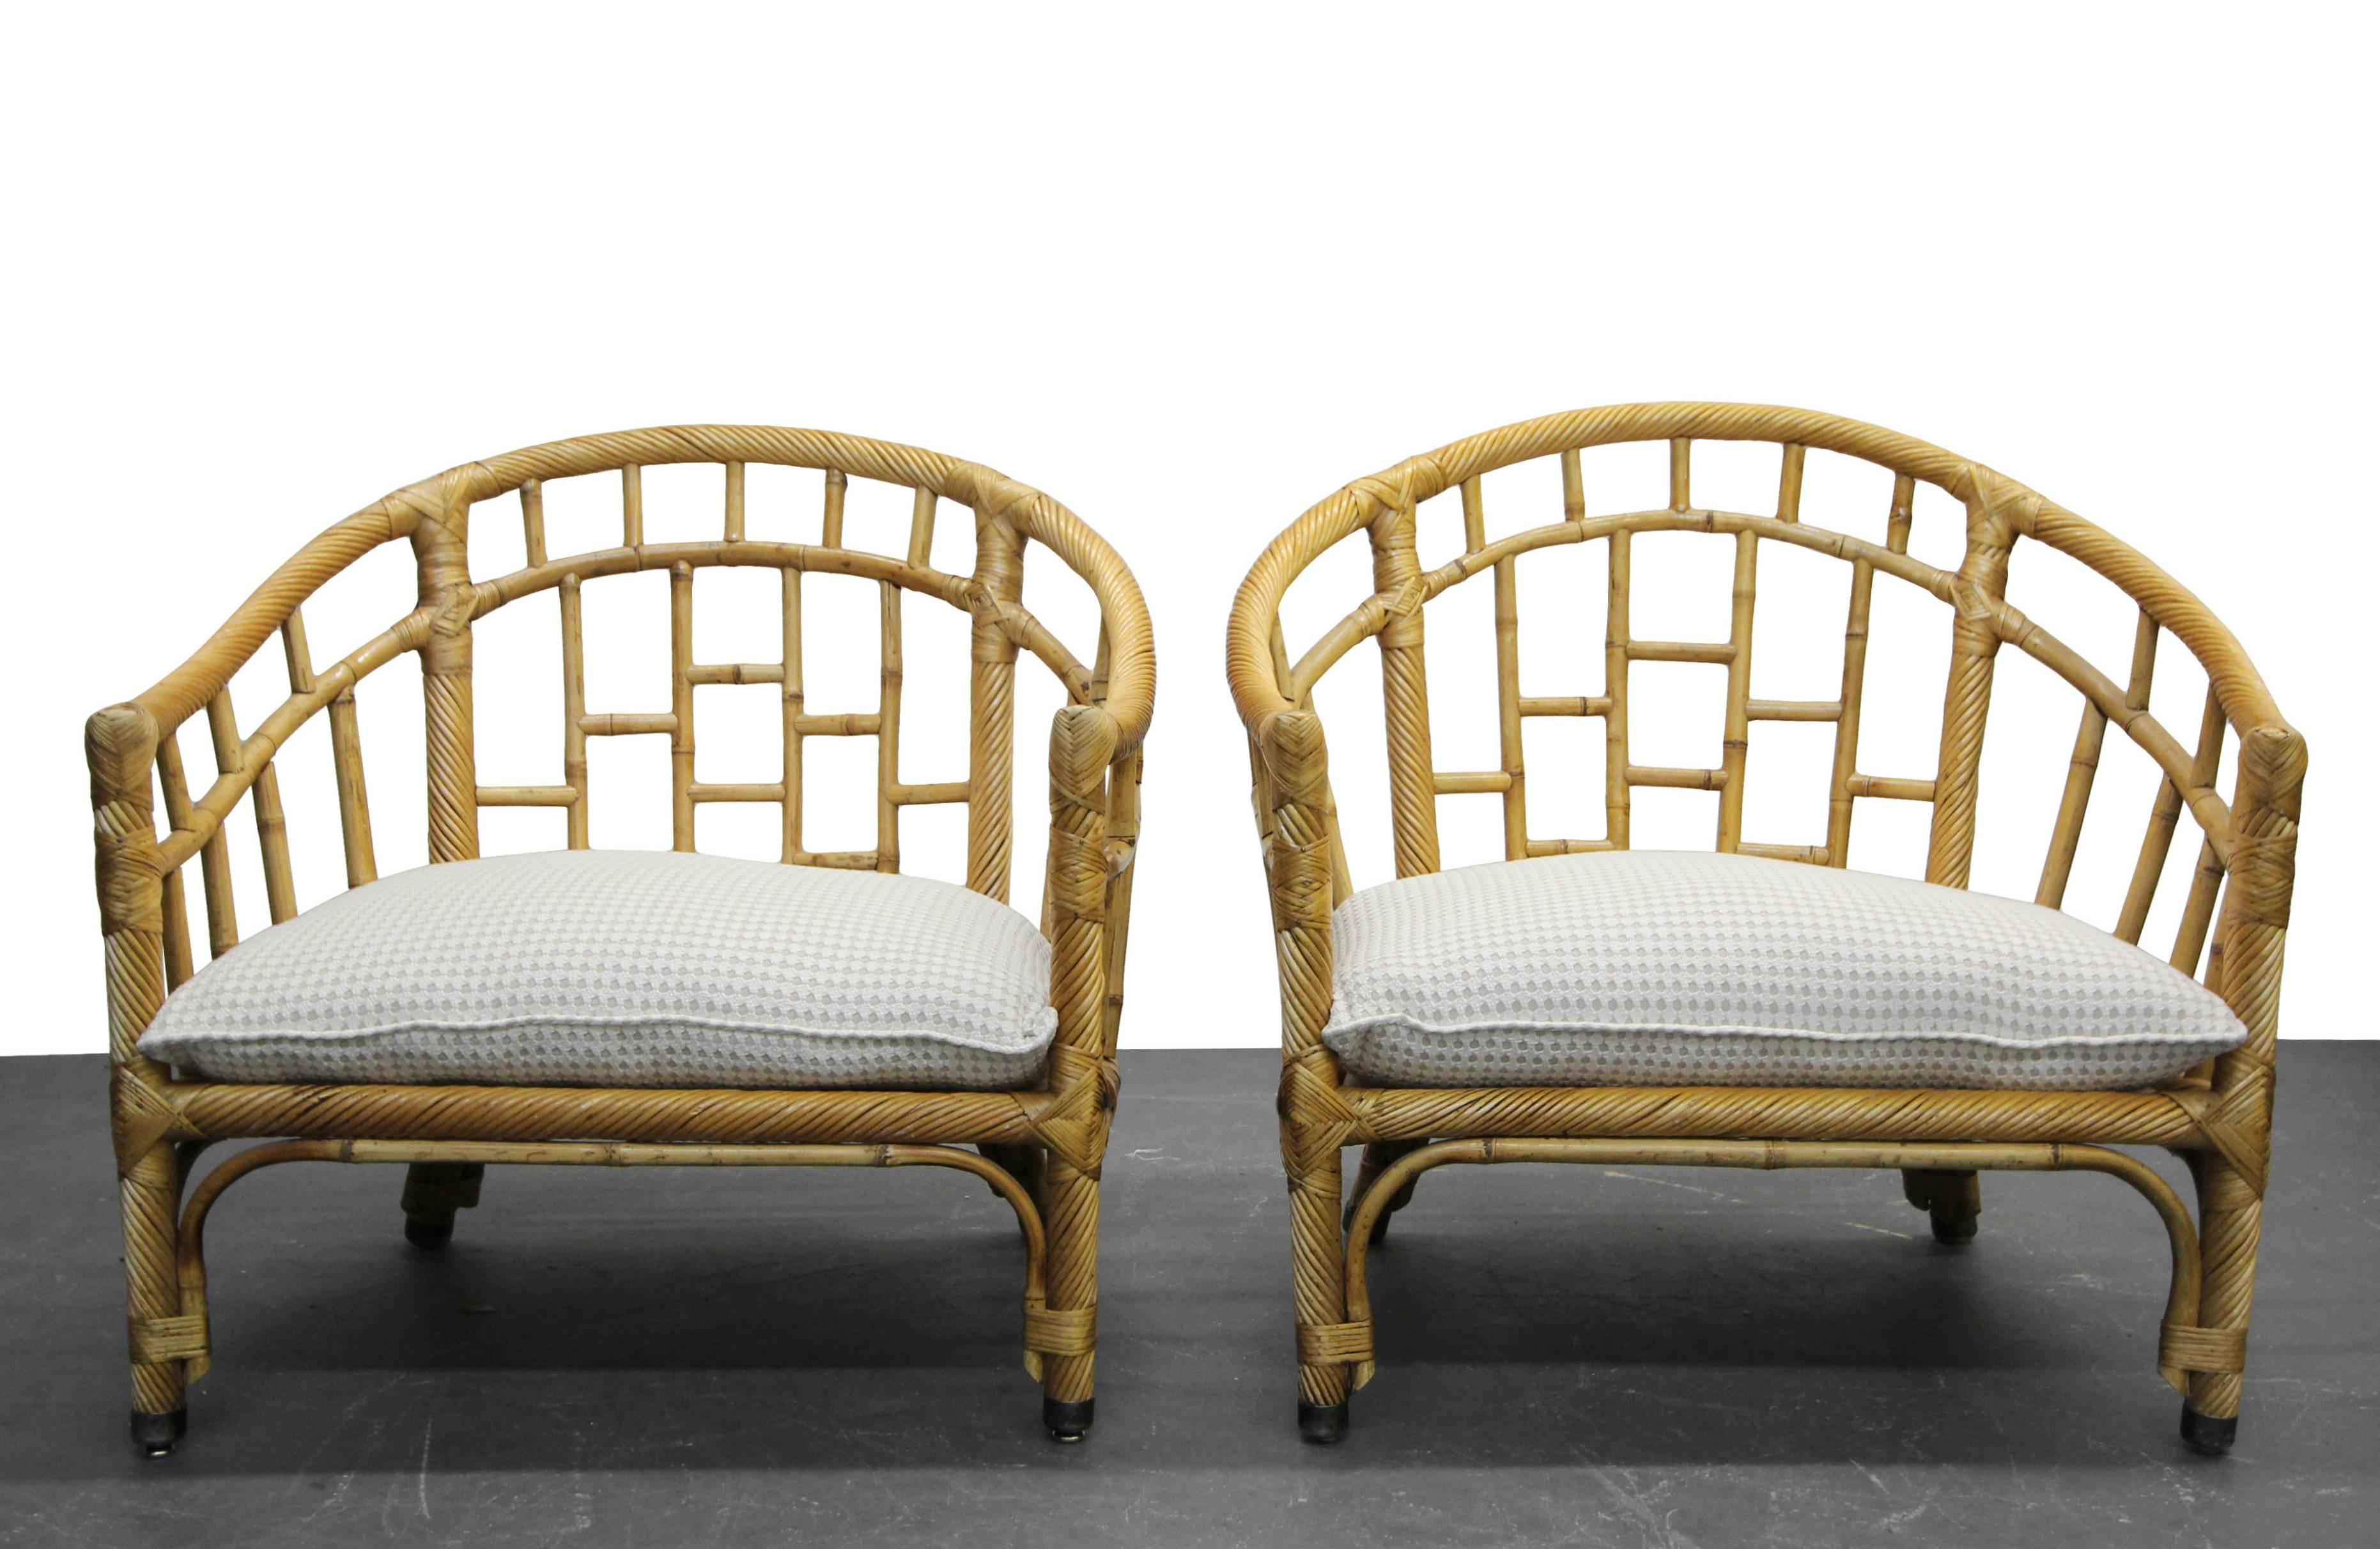 Pair of Oversized Barrel Back Bamboo and Rattan Chairs by Ficks Reed 1